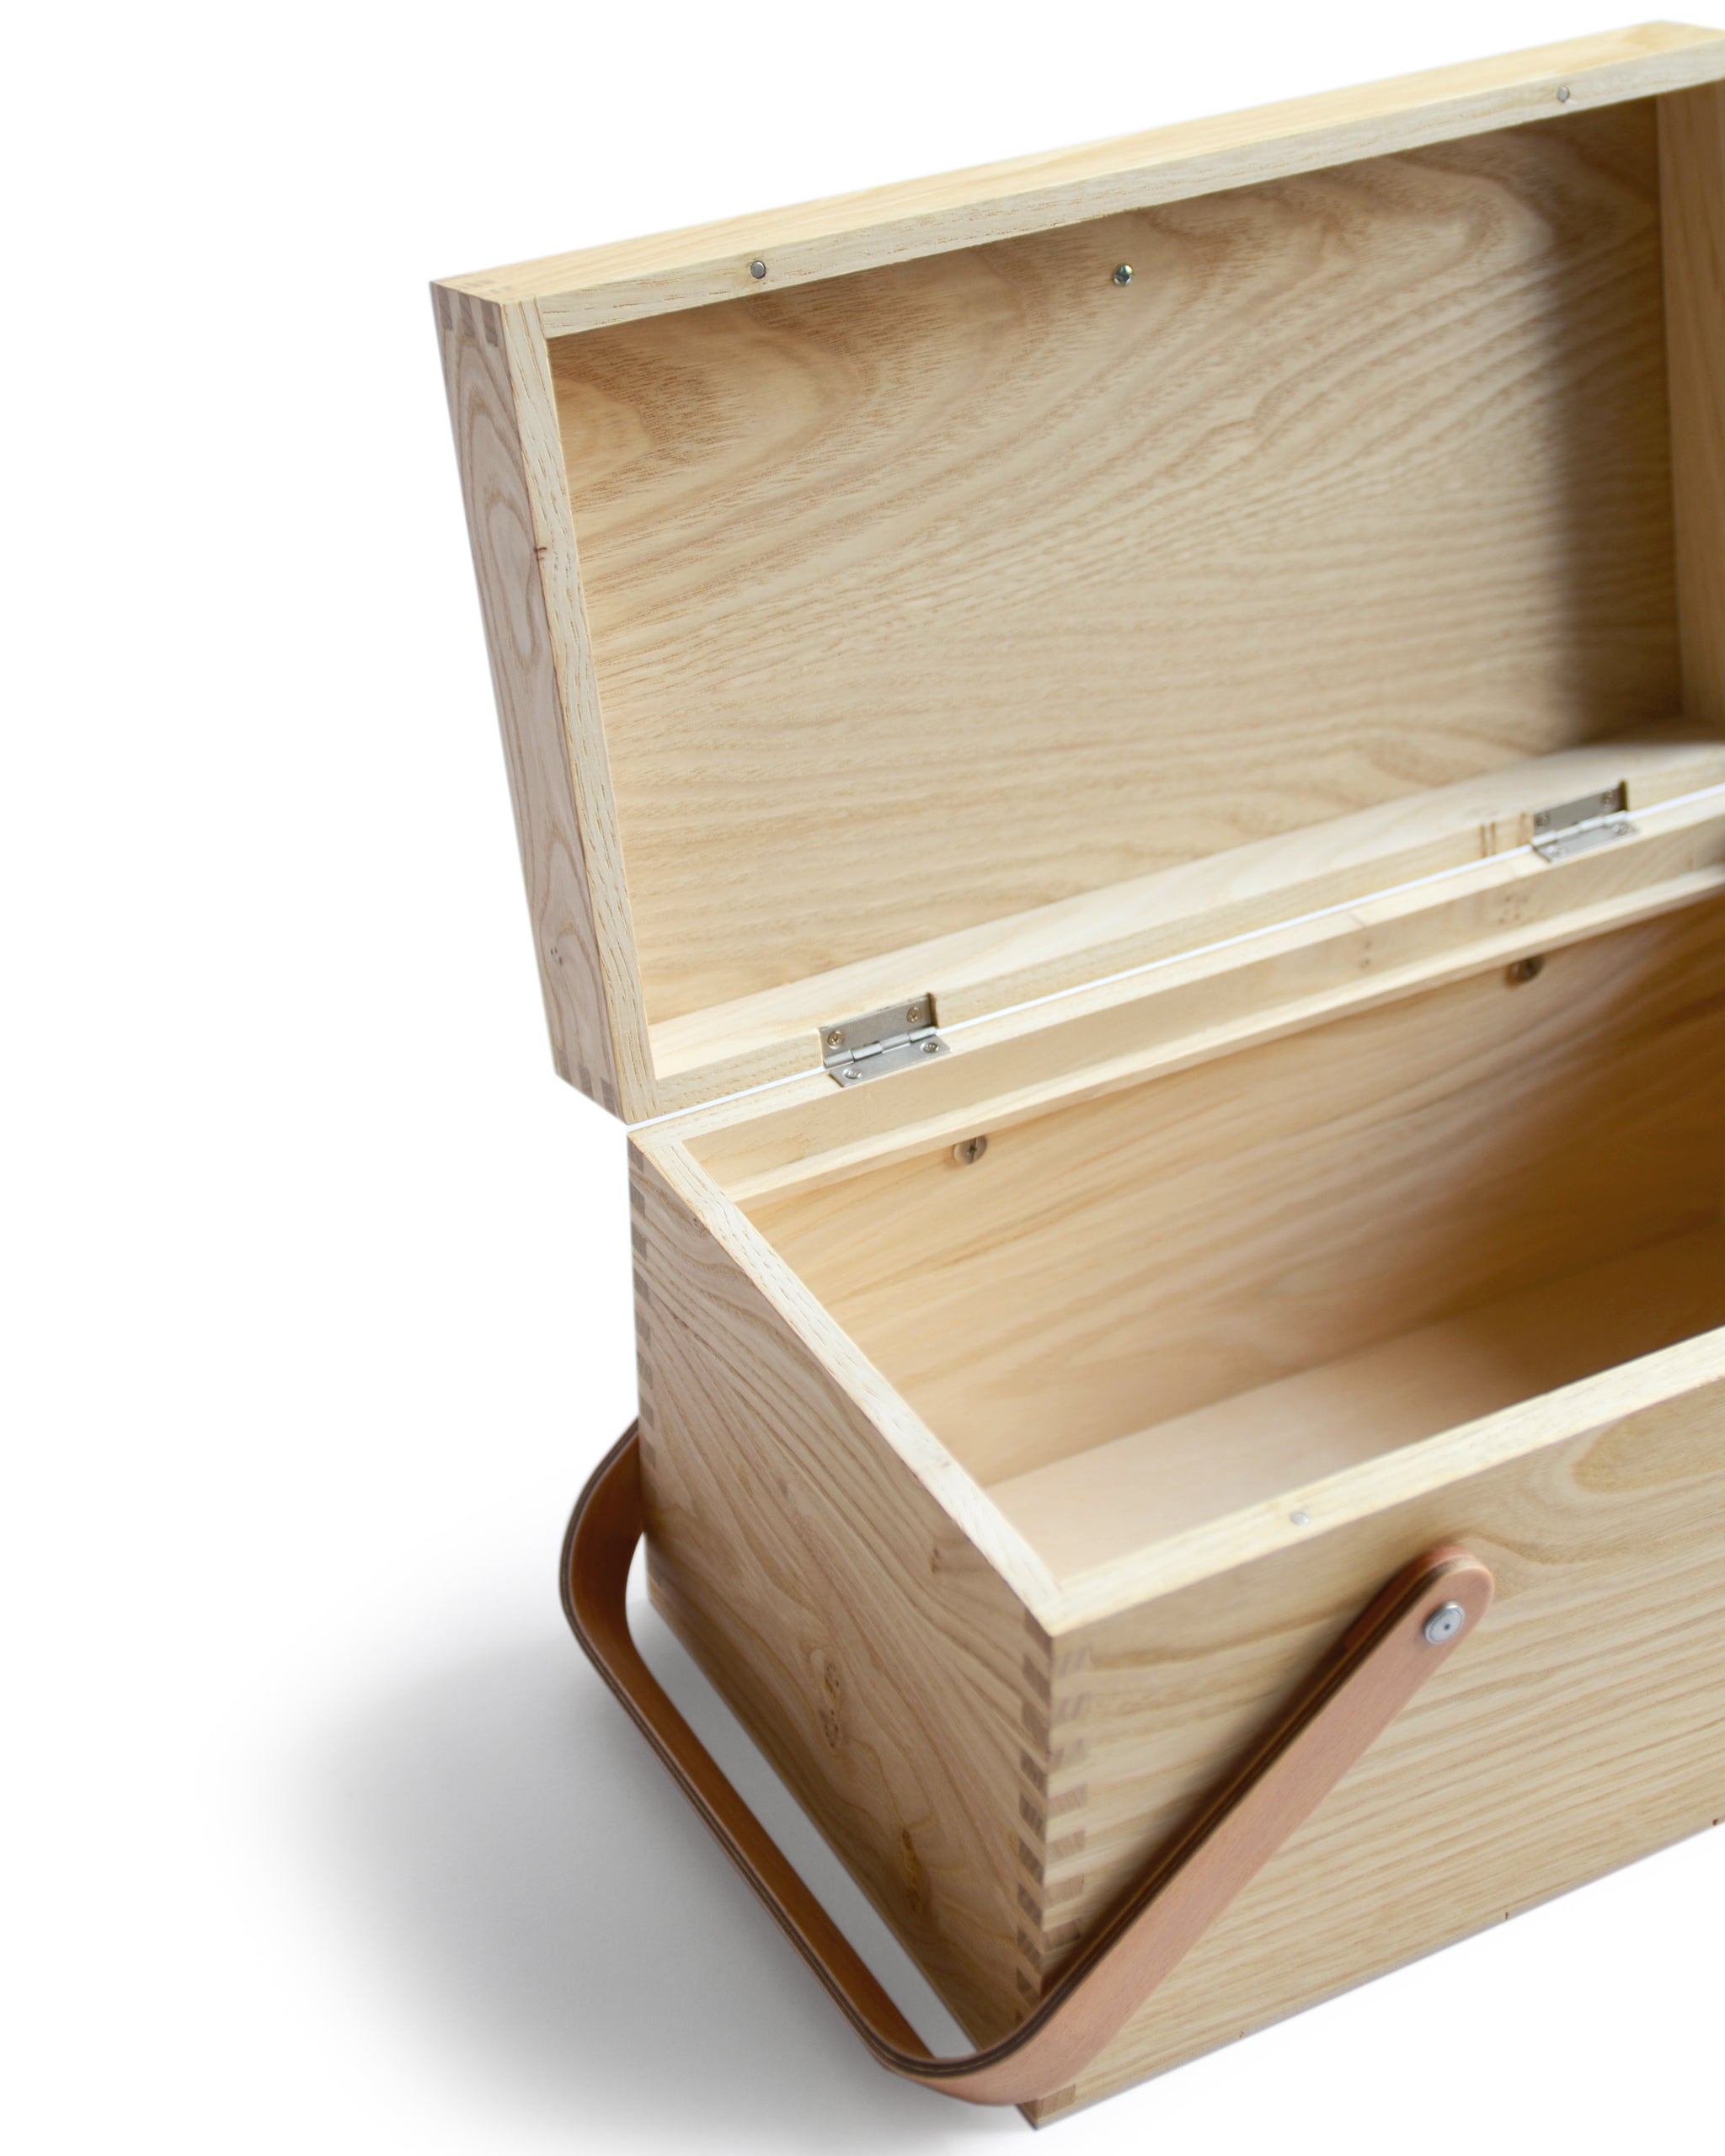 Cropped angled image of open chestnut wood picnic box featuring wood joinery on edges with inner compartments removed by Shinsuke Tanabe against white background.